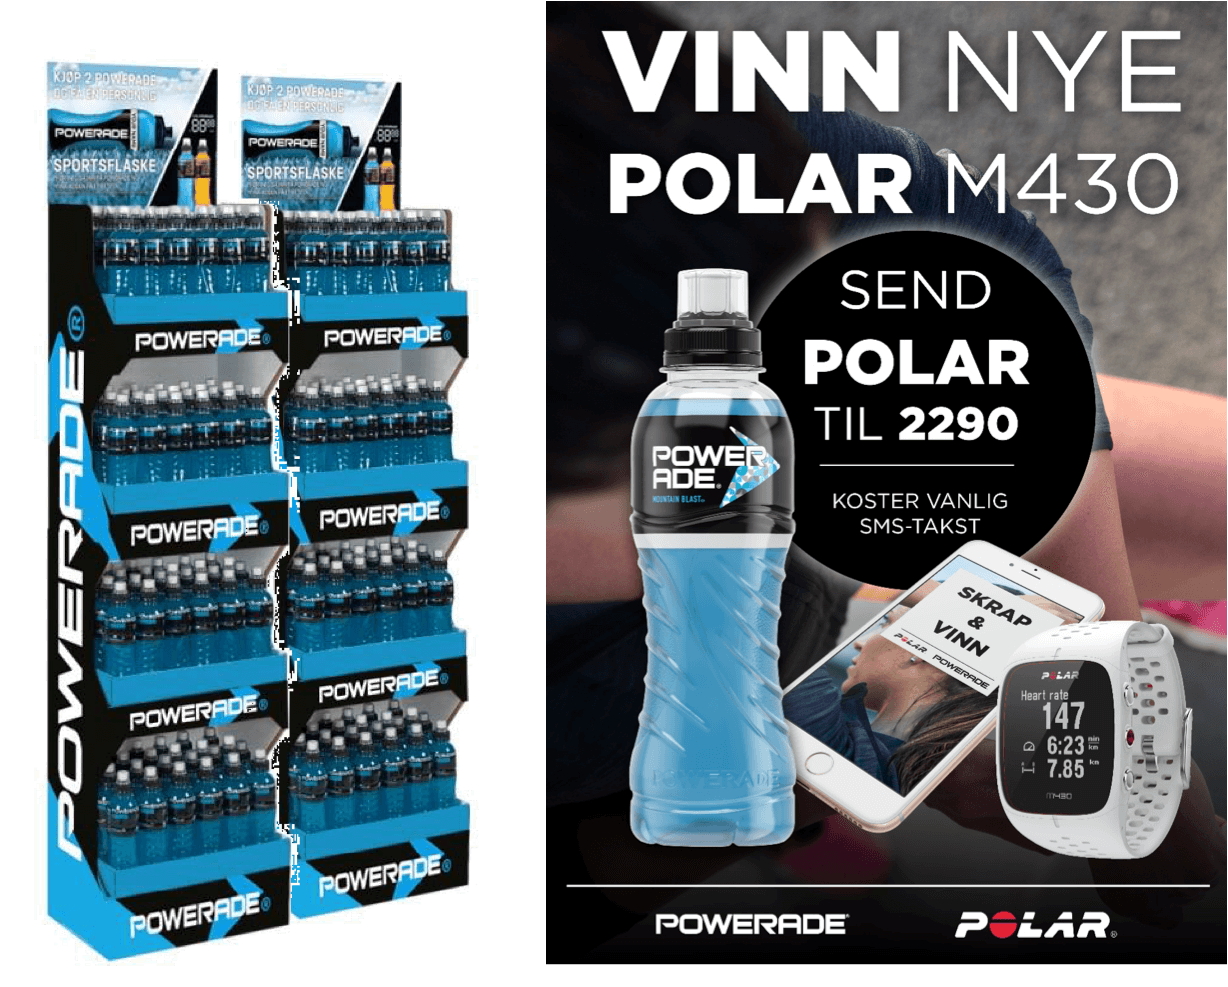 Powerade partnered up with POLAR. In-store engagement campaign